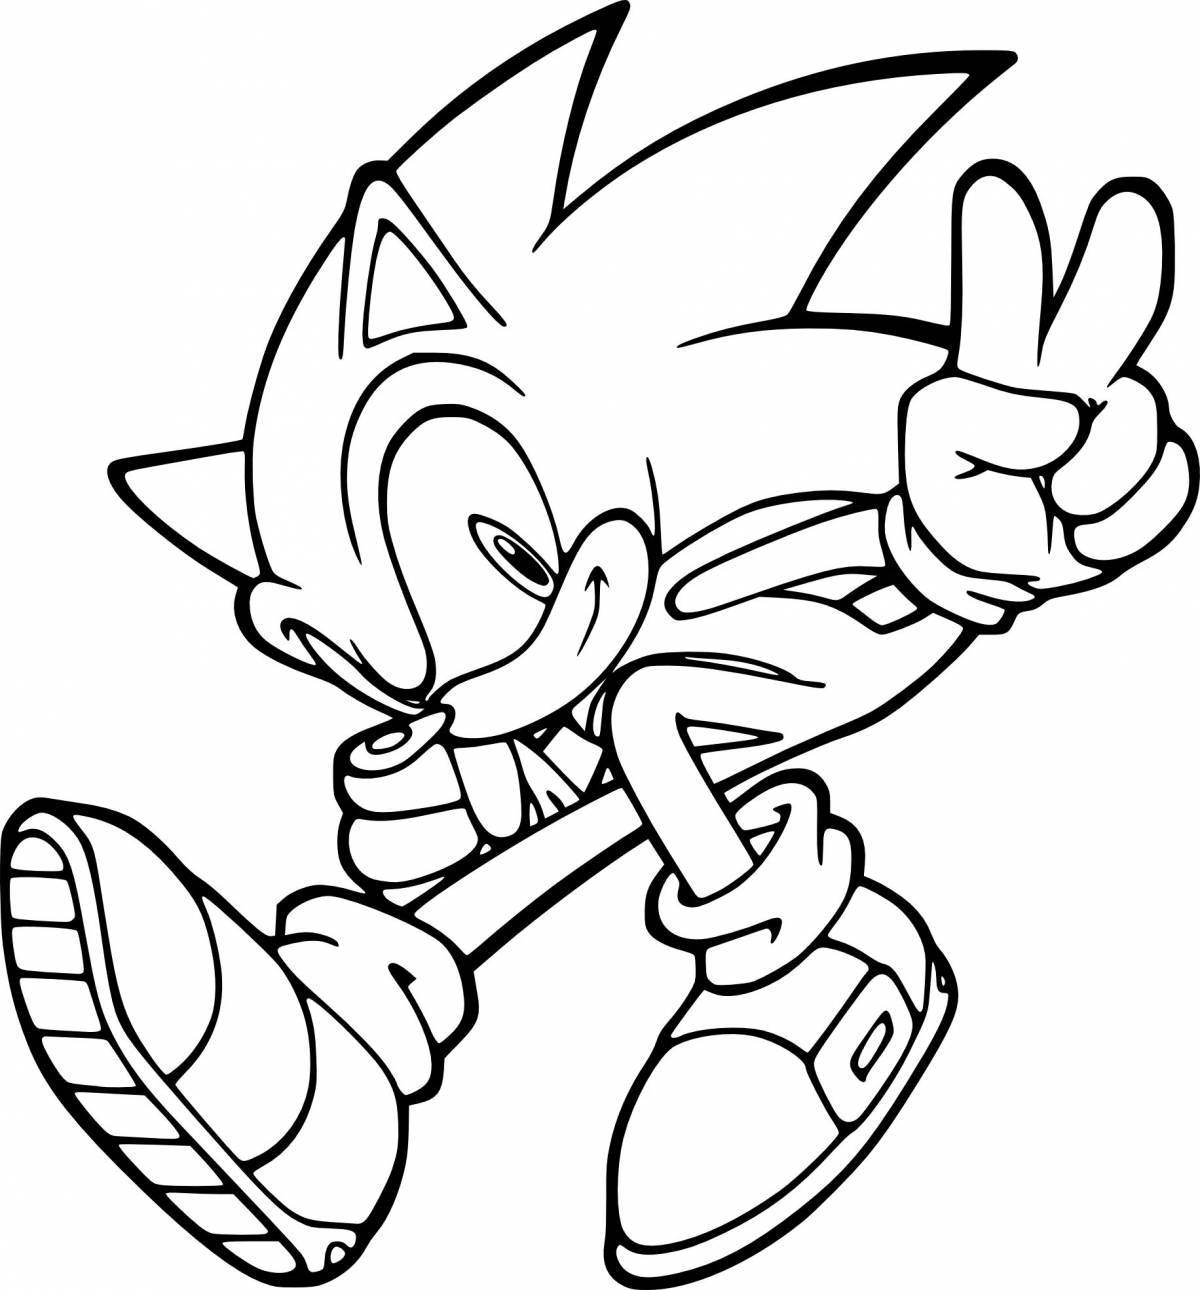 Great sonic the hedgehog coloring book